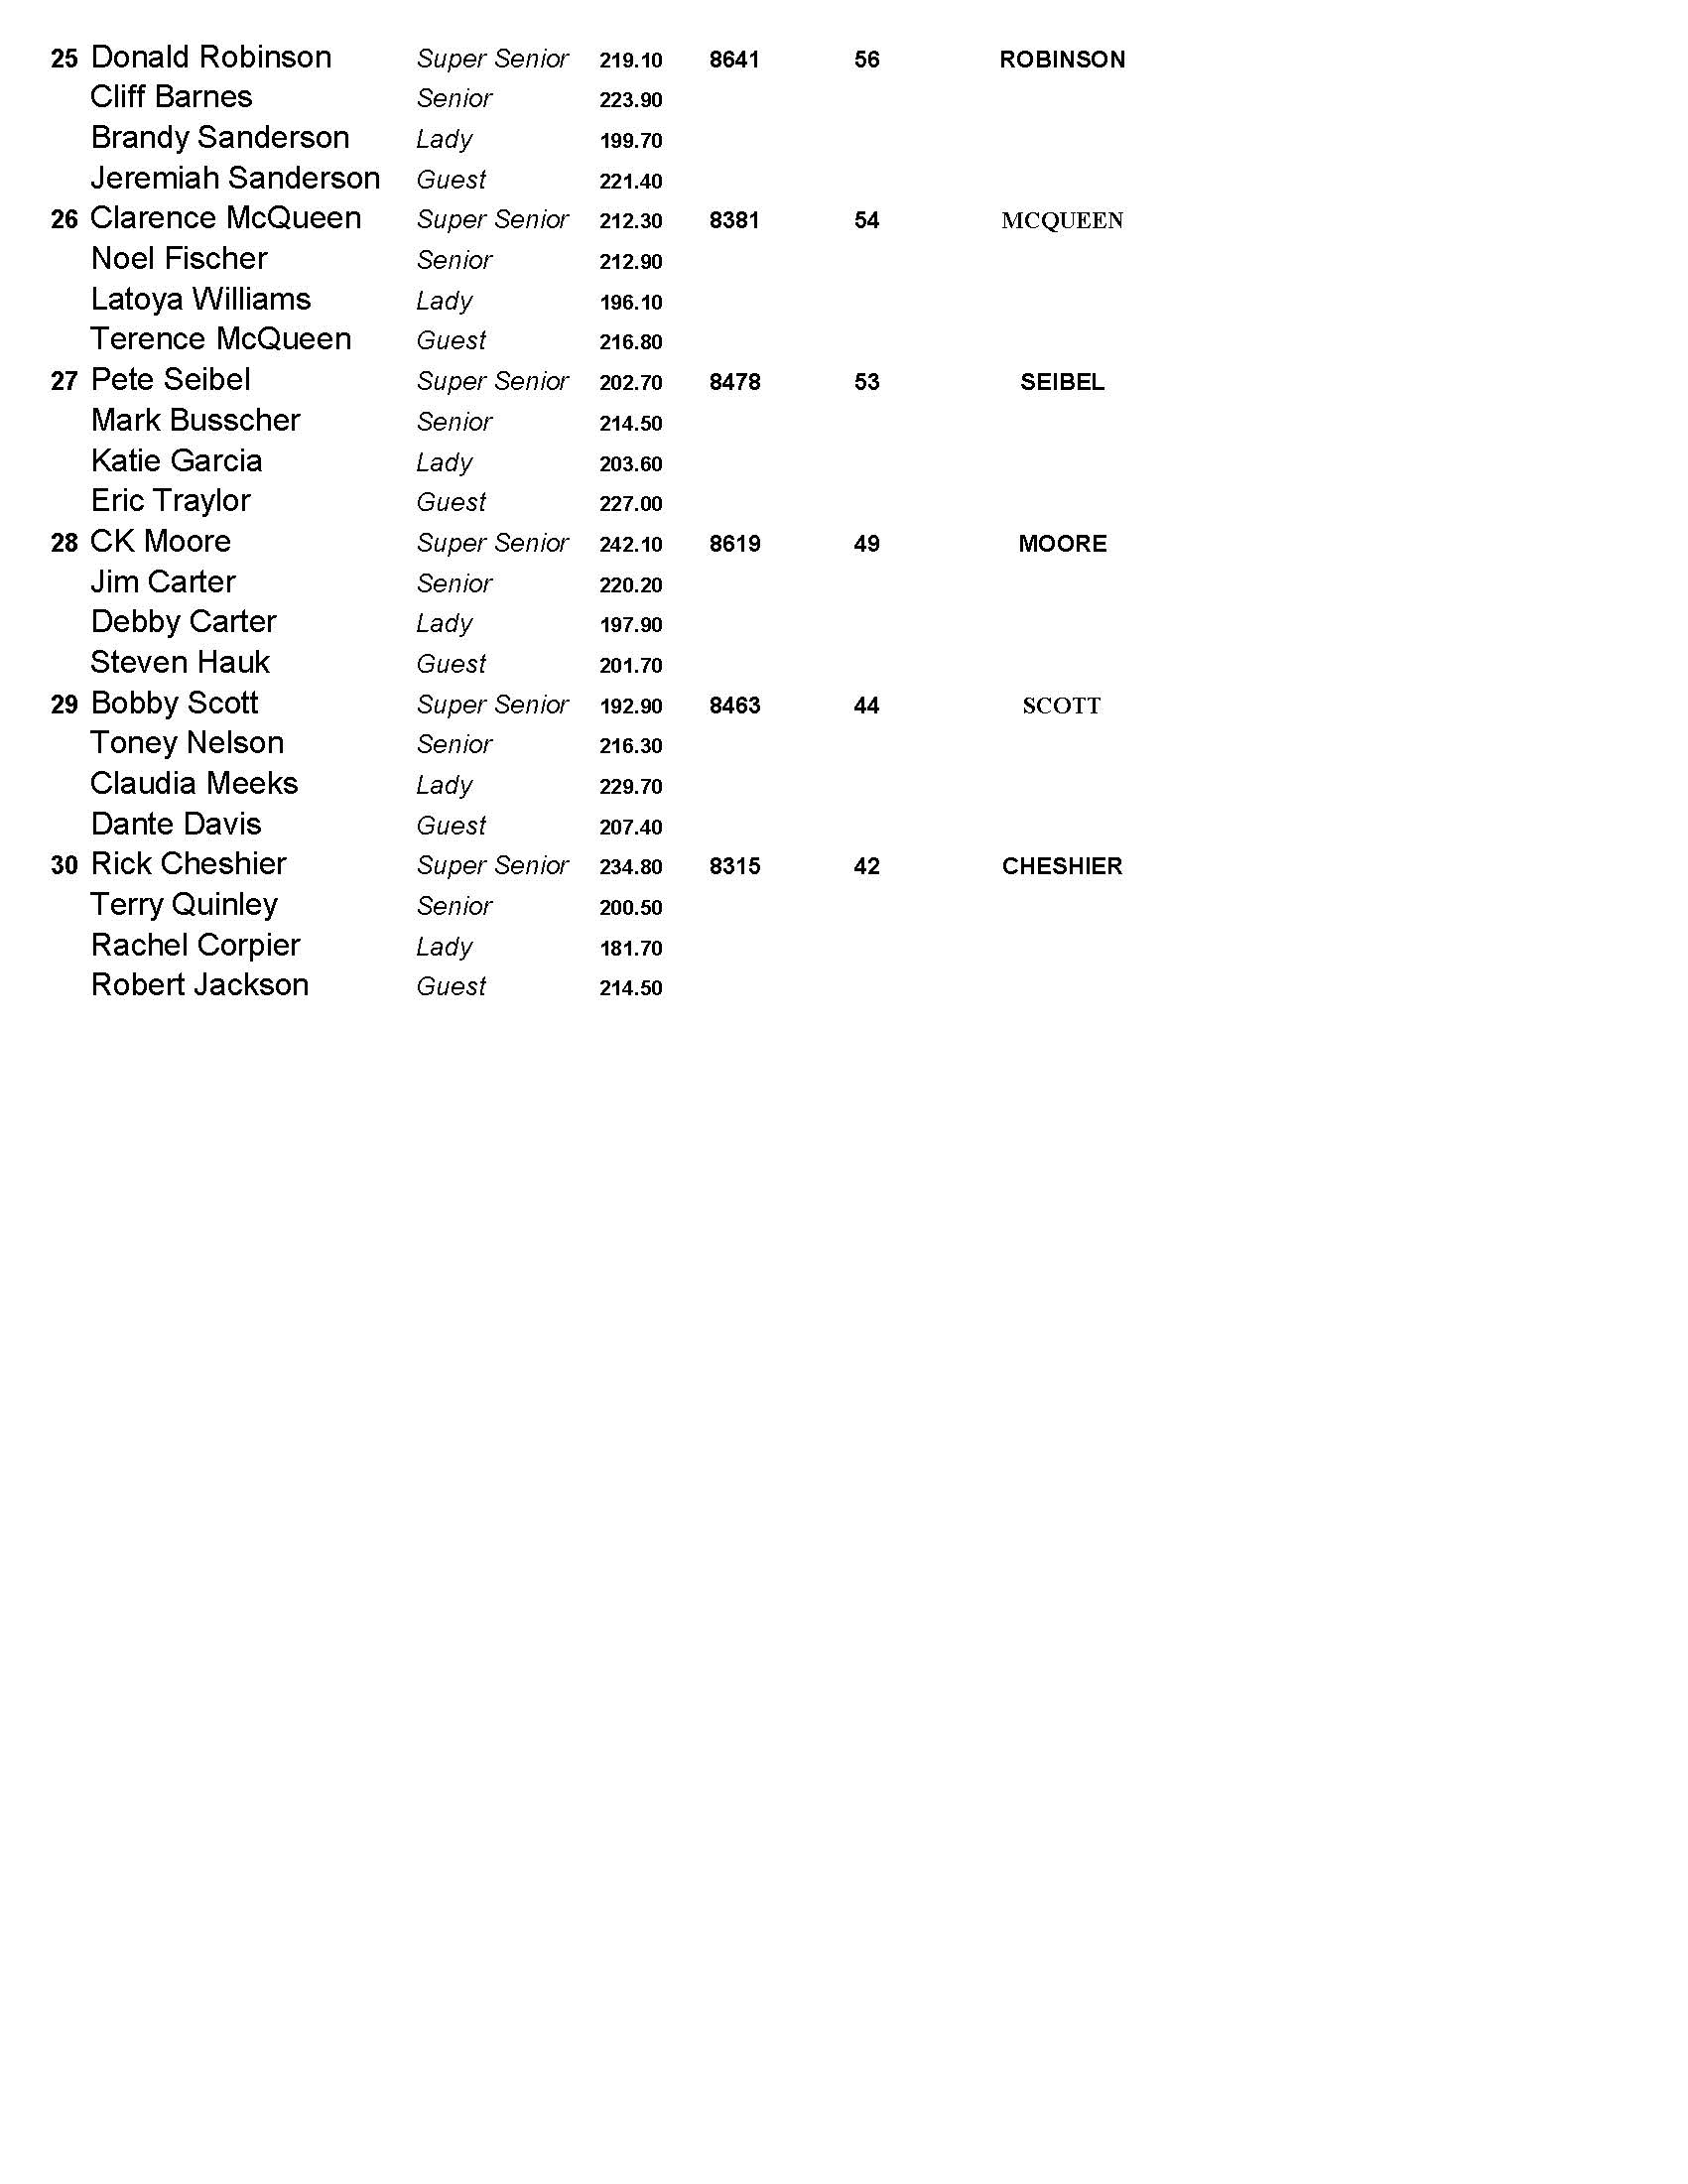 06132021results_Page_3